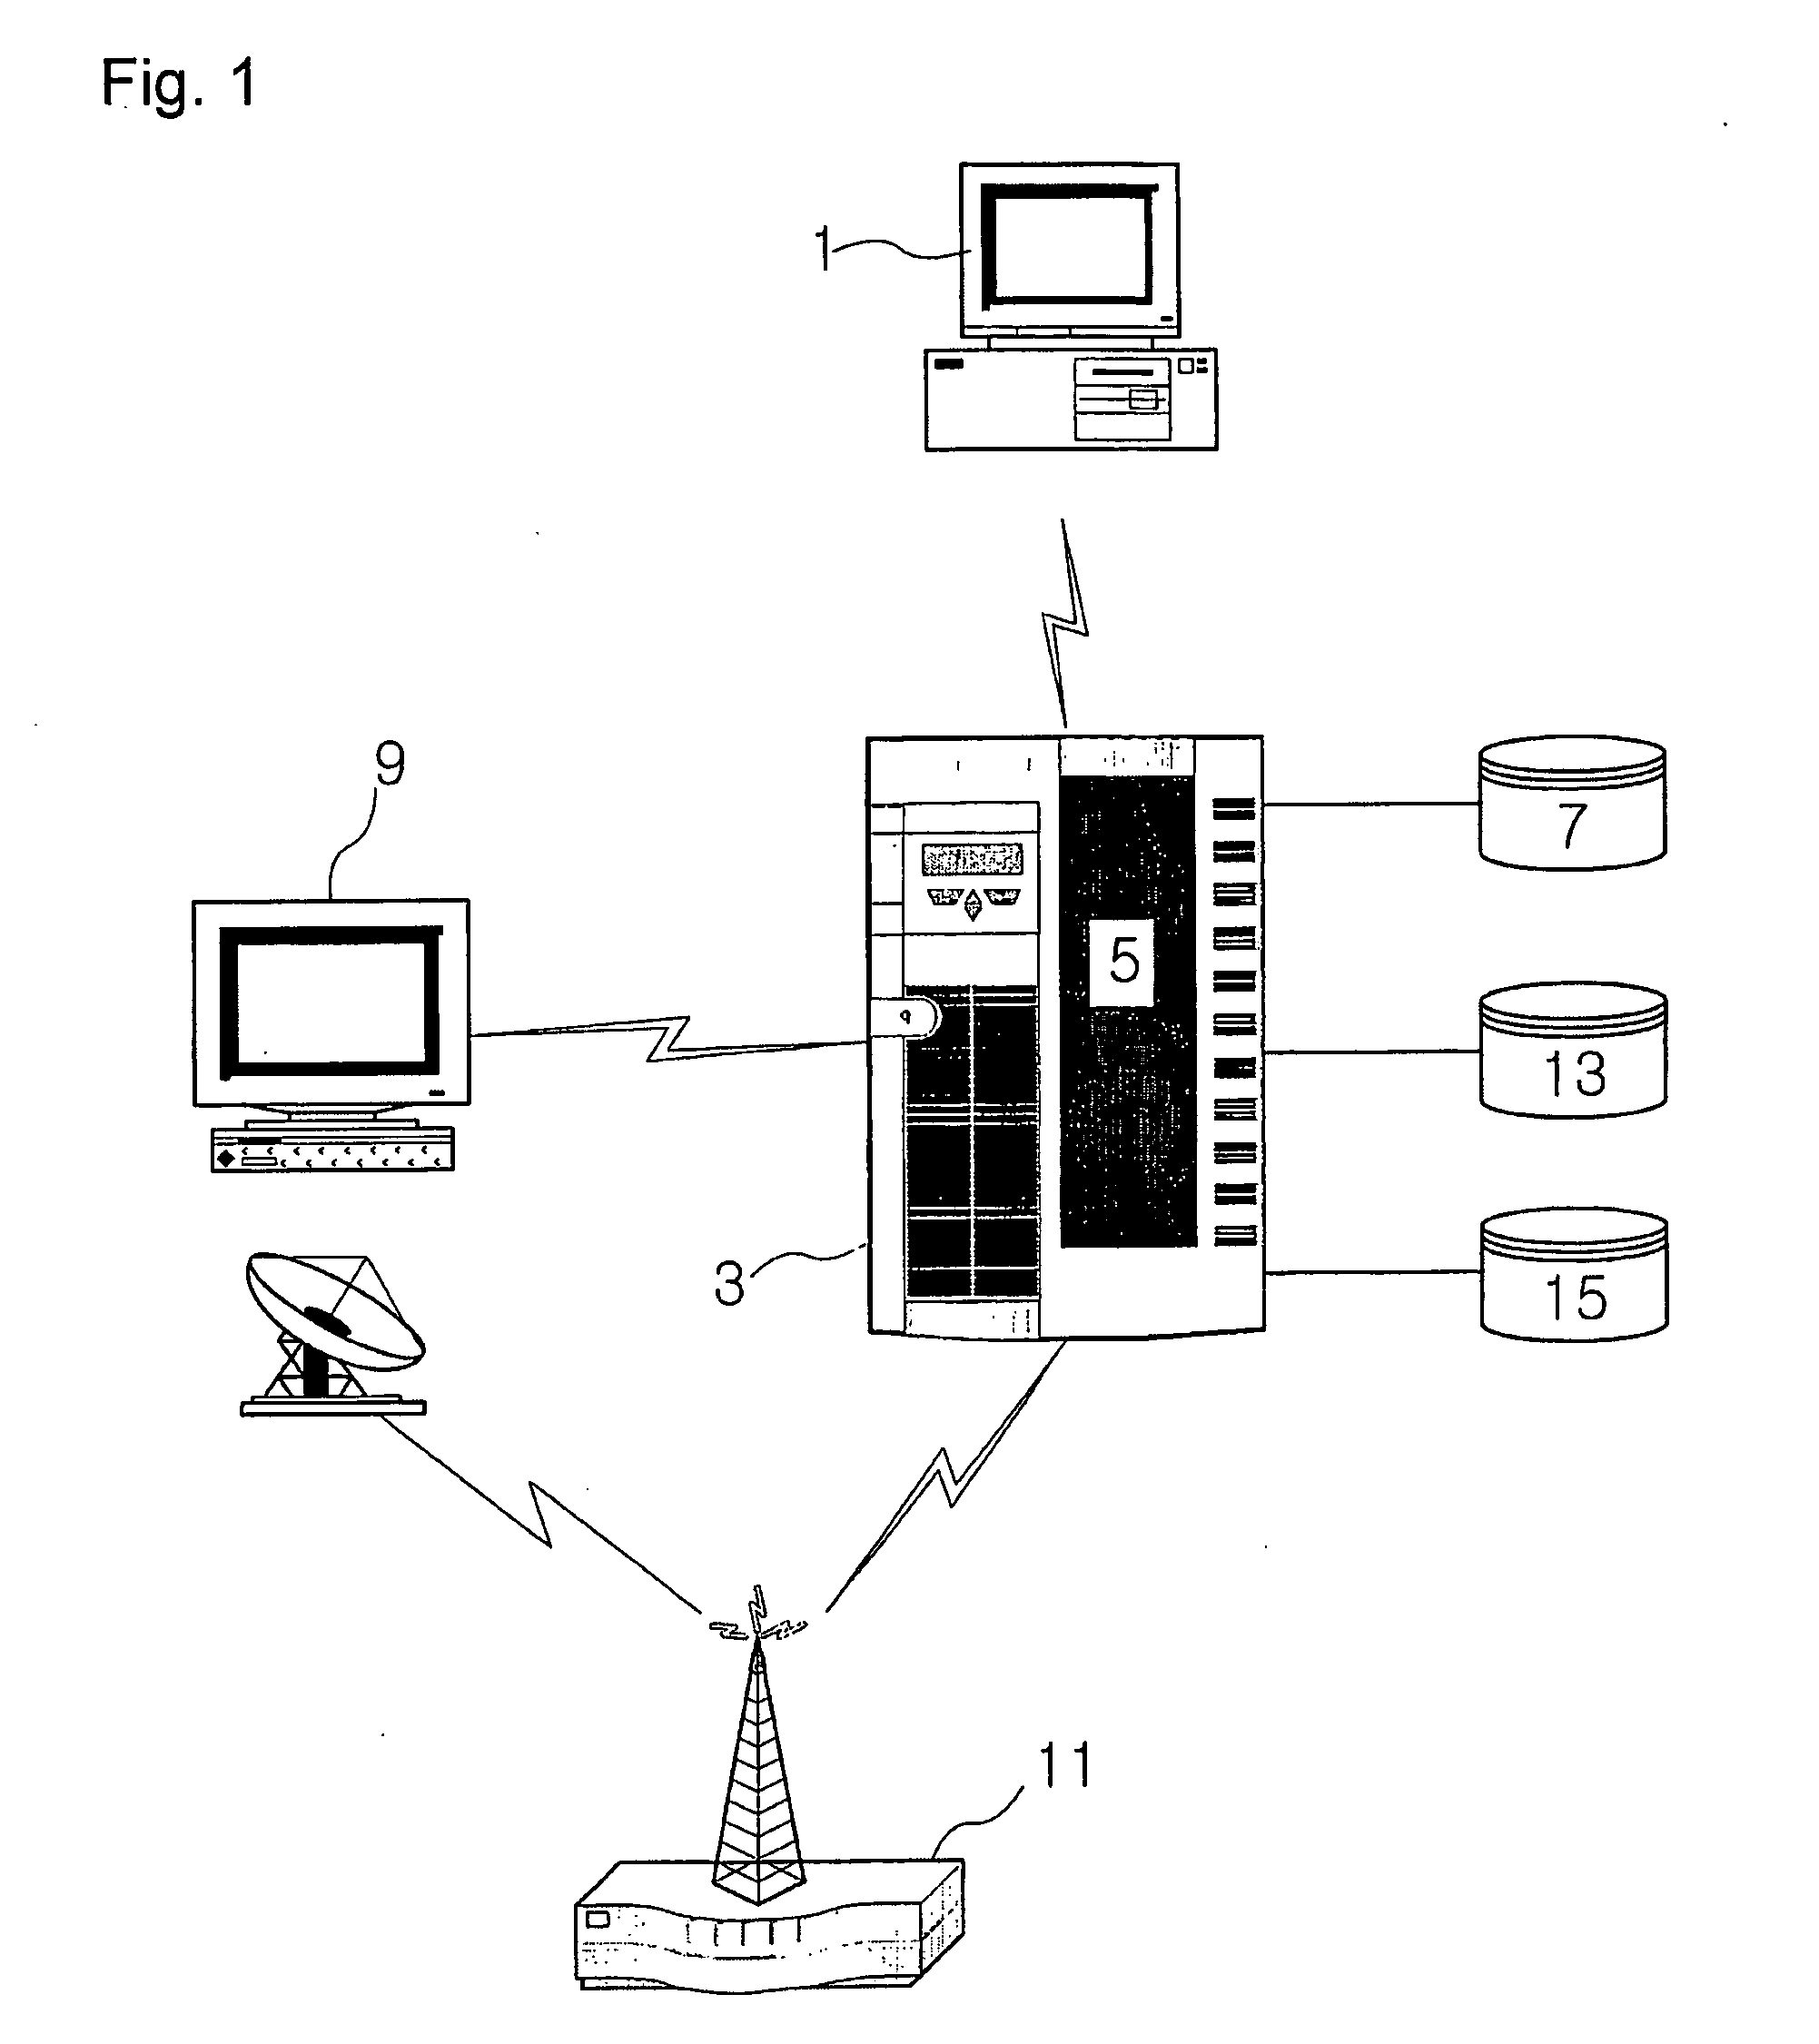 Method and system for on-line delivery of advertising release material and confirmation of on-air transmission